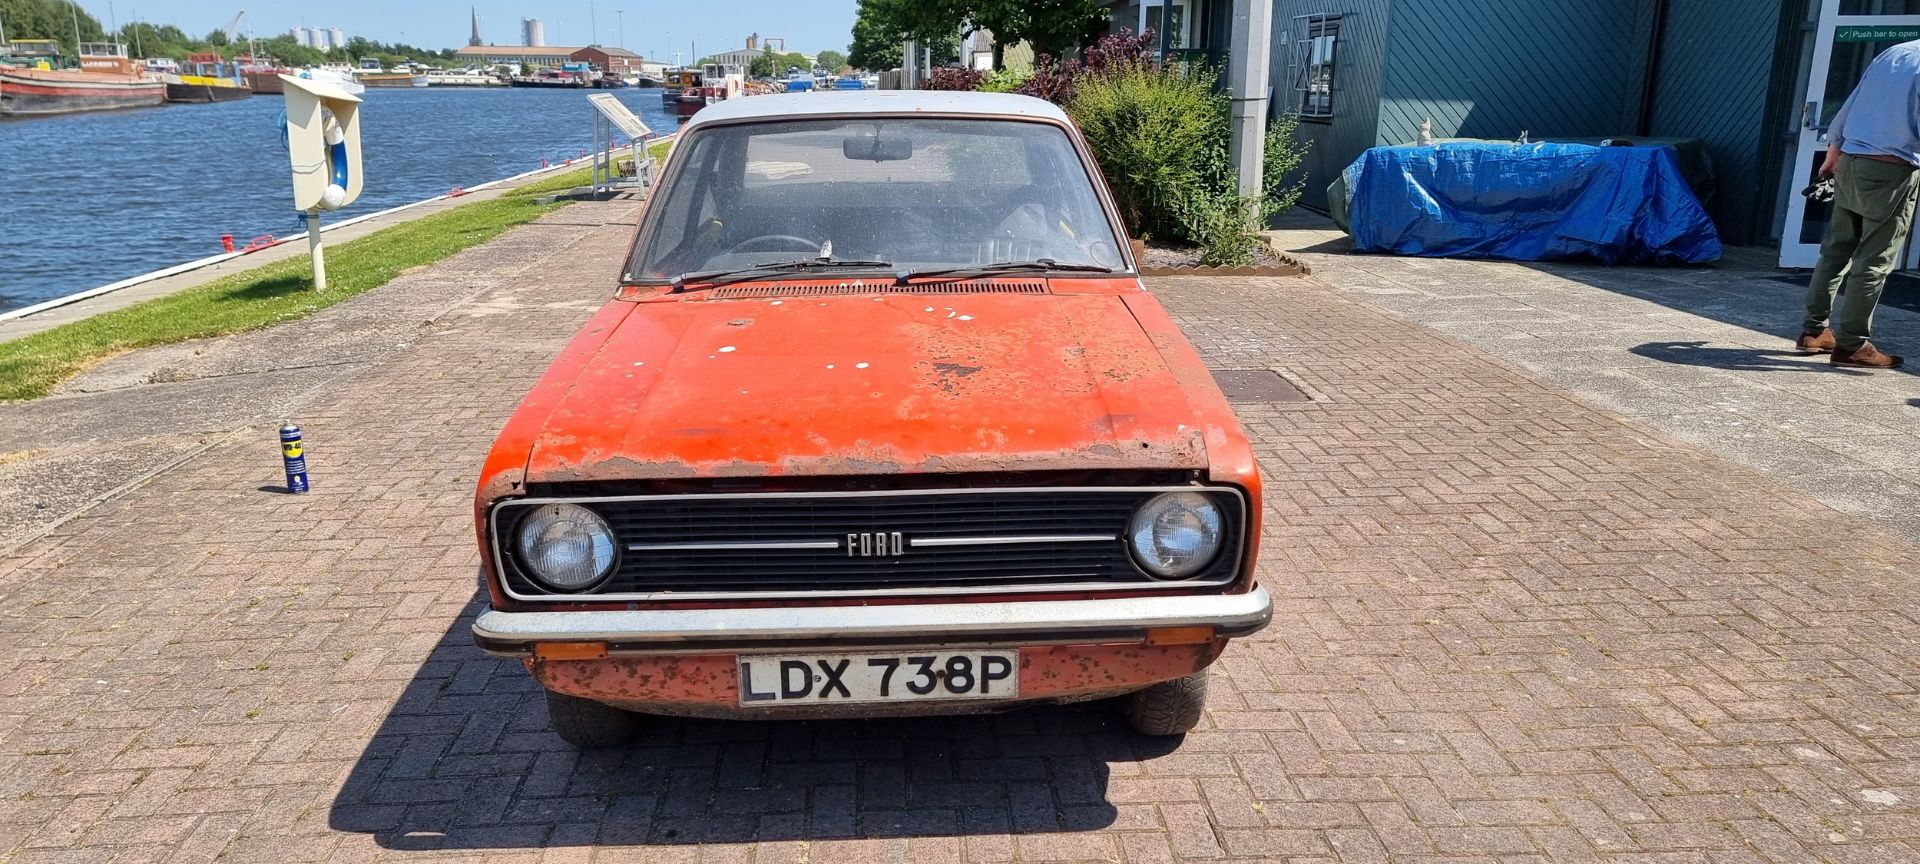 1975 Ford Escort 1.3L, 2 door, 1298cc, project. Registration number LDX 738P. Chassis number - Image 3 of 13